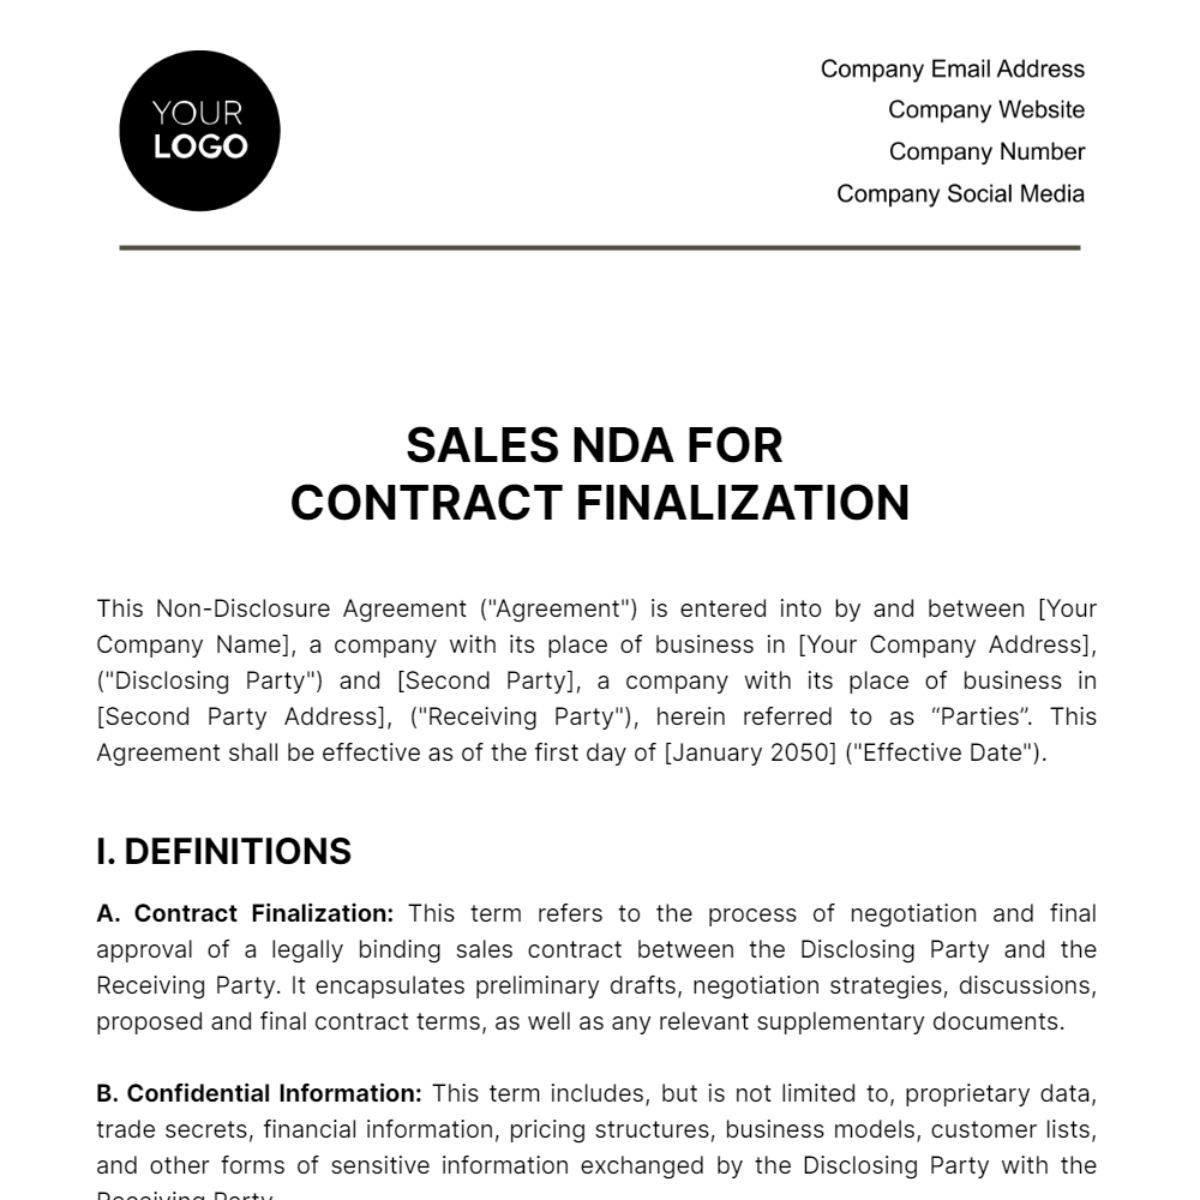 Sales NDA for Contract Finalization Template